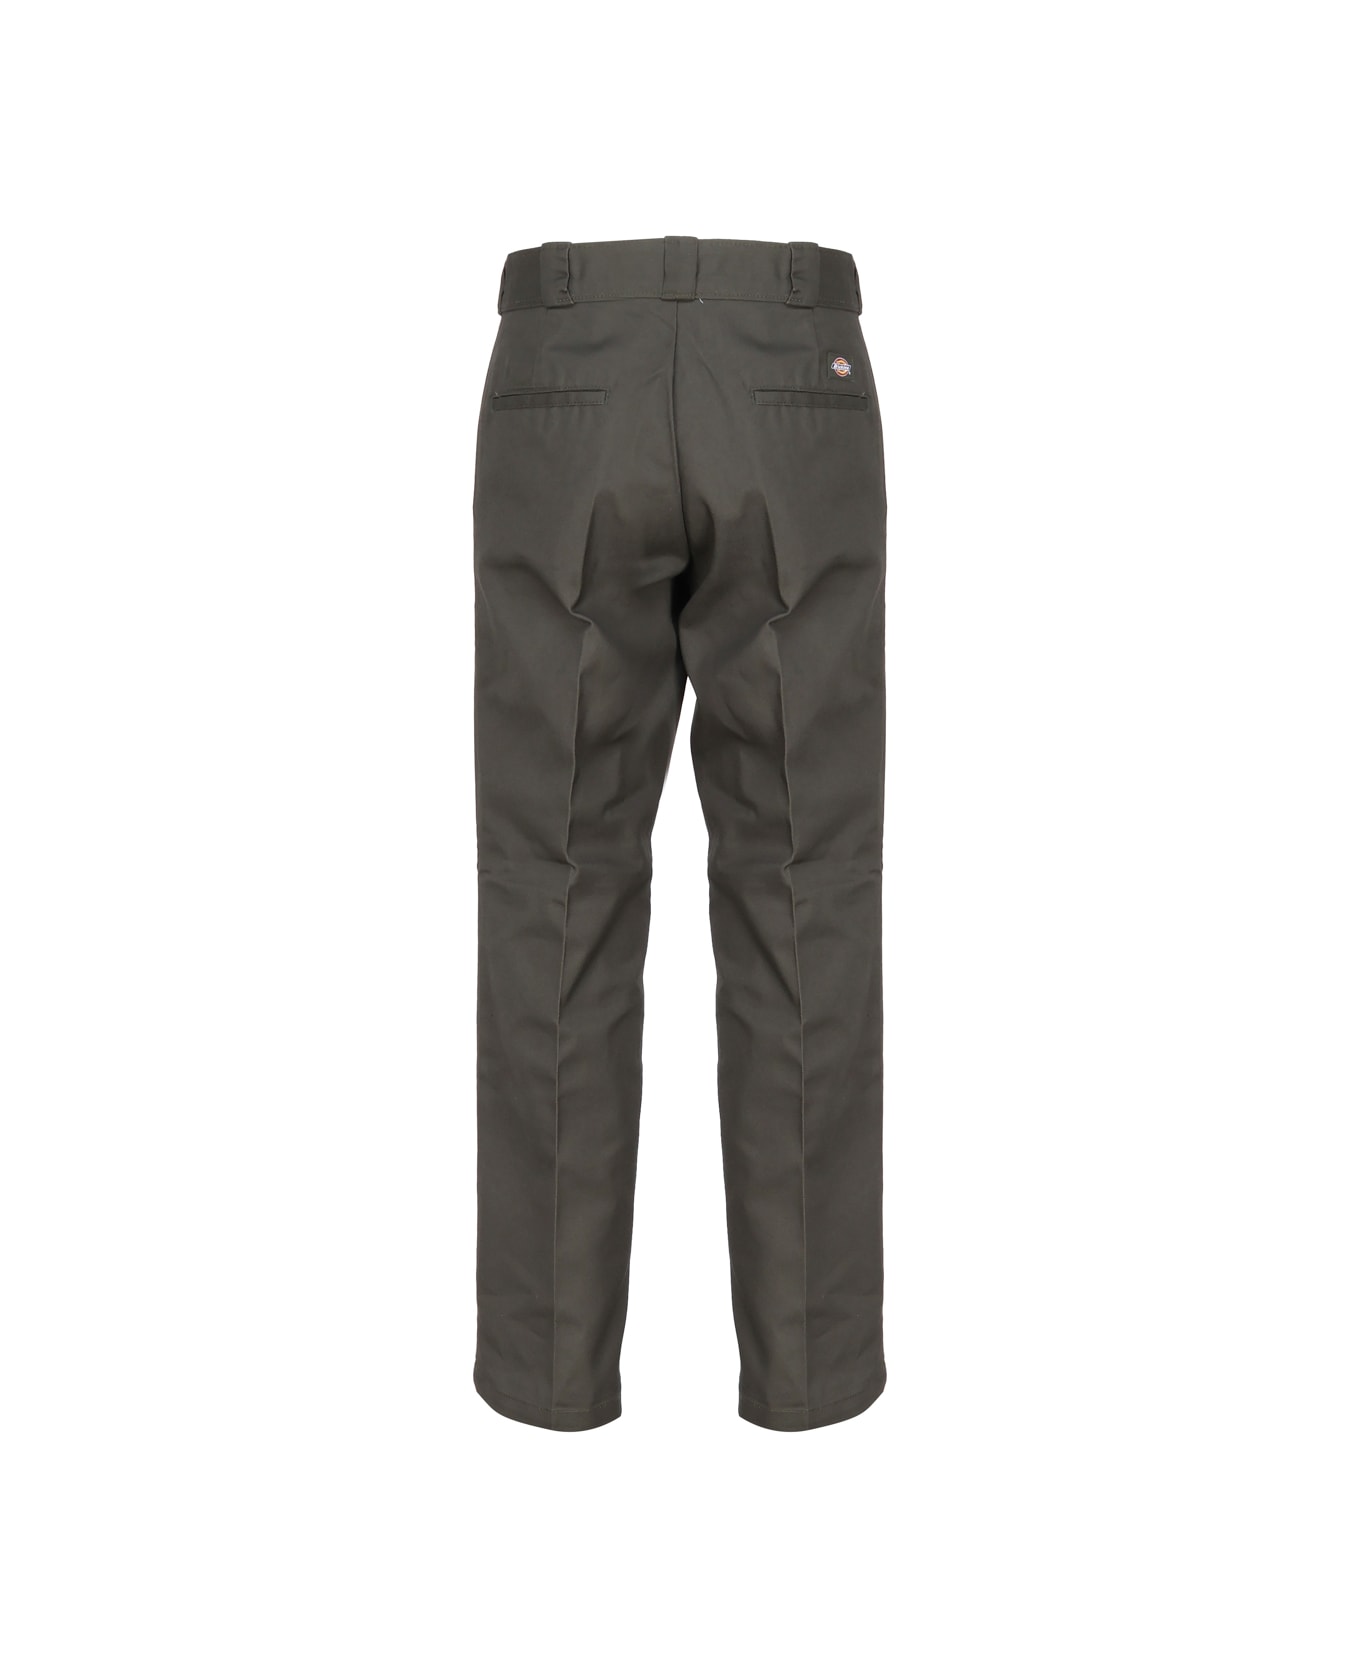 Dickies Chino Trousers - Olive